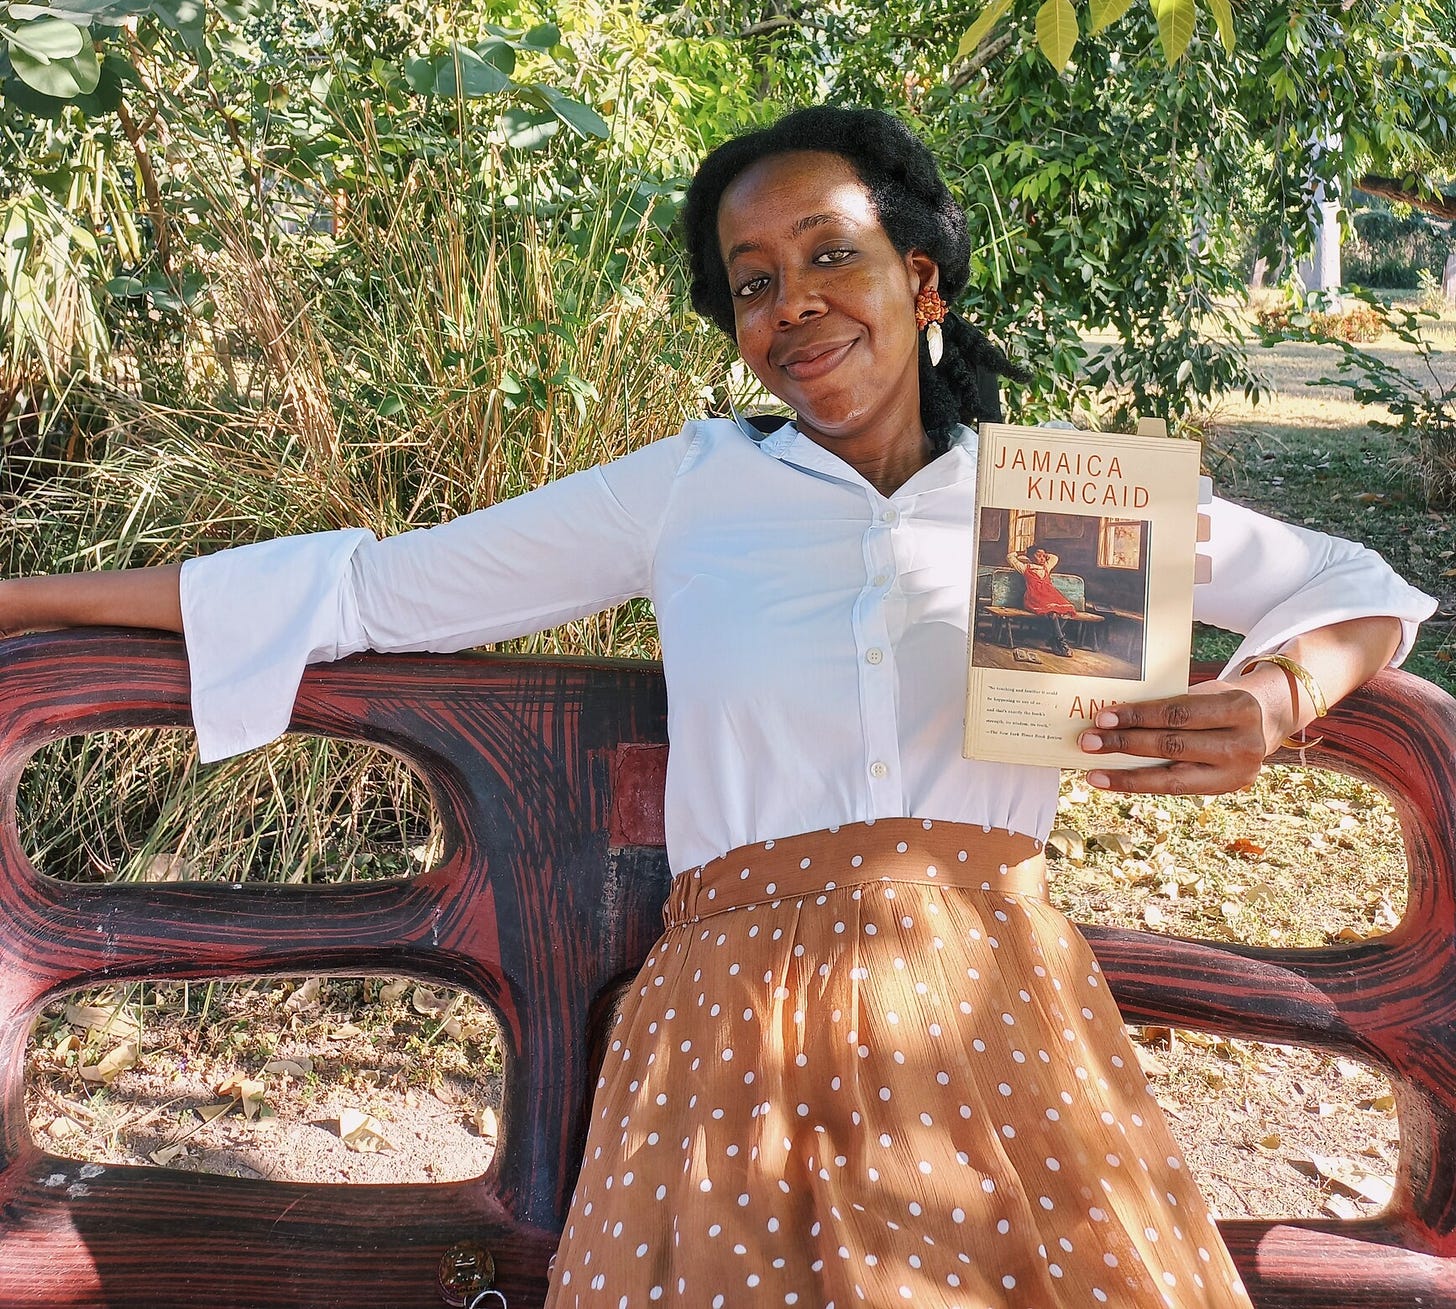 A black woman with natural hair in a loose ponytail, wearing a light brown skirt with white polka dots and a long sleeve white shirt is sitting on a red bench under a tree surrounded by greenery. She's holding a paperback copy of Annie John as she leans back against the bench rest with a slight smile.